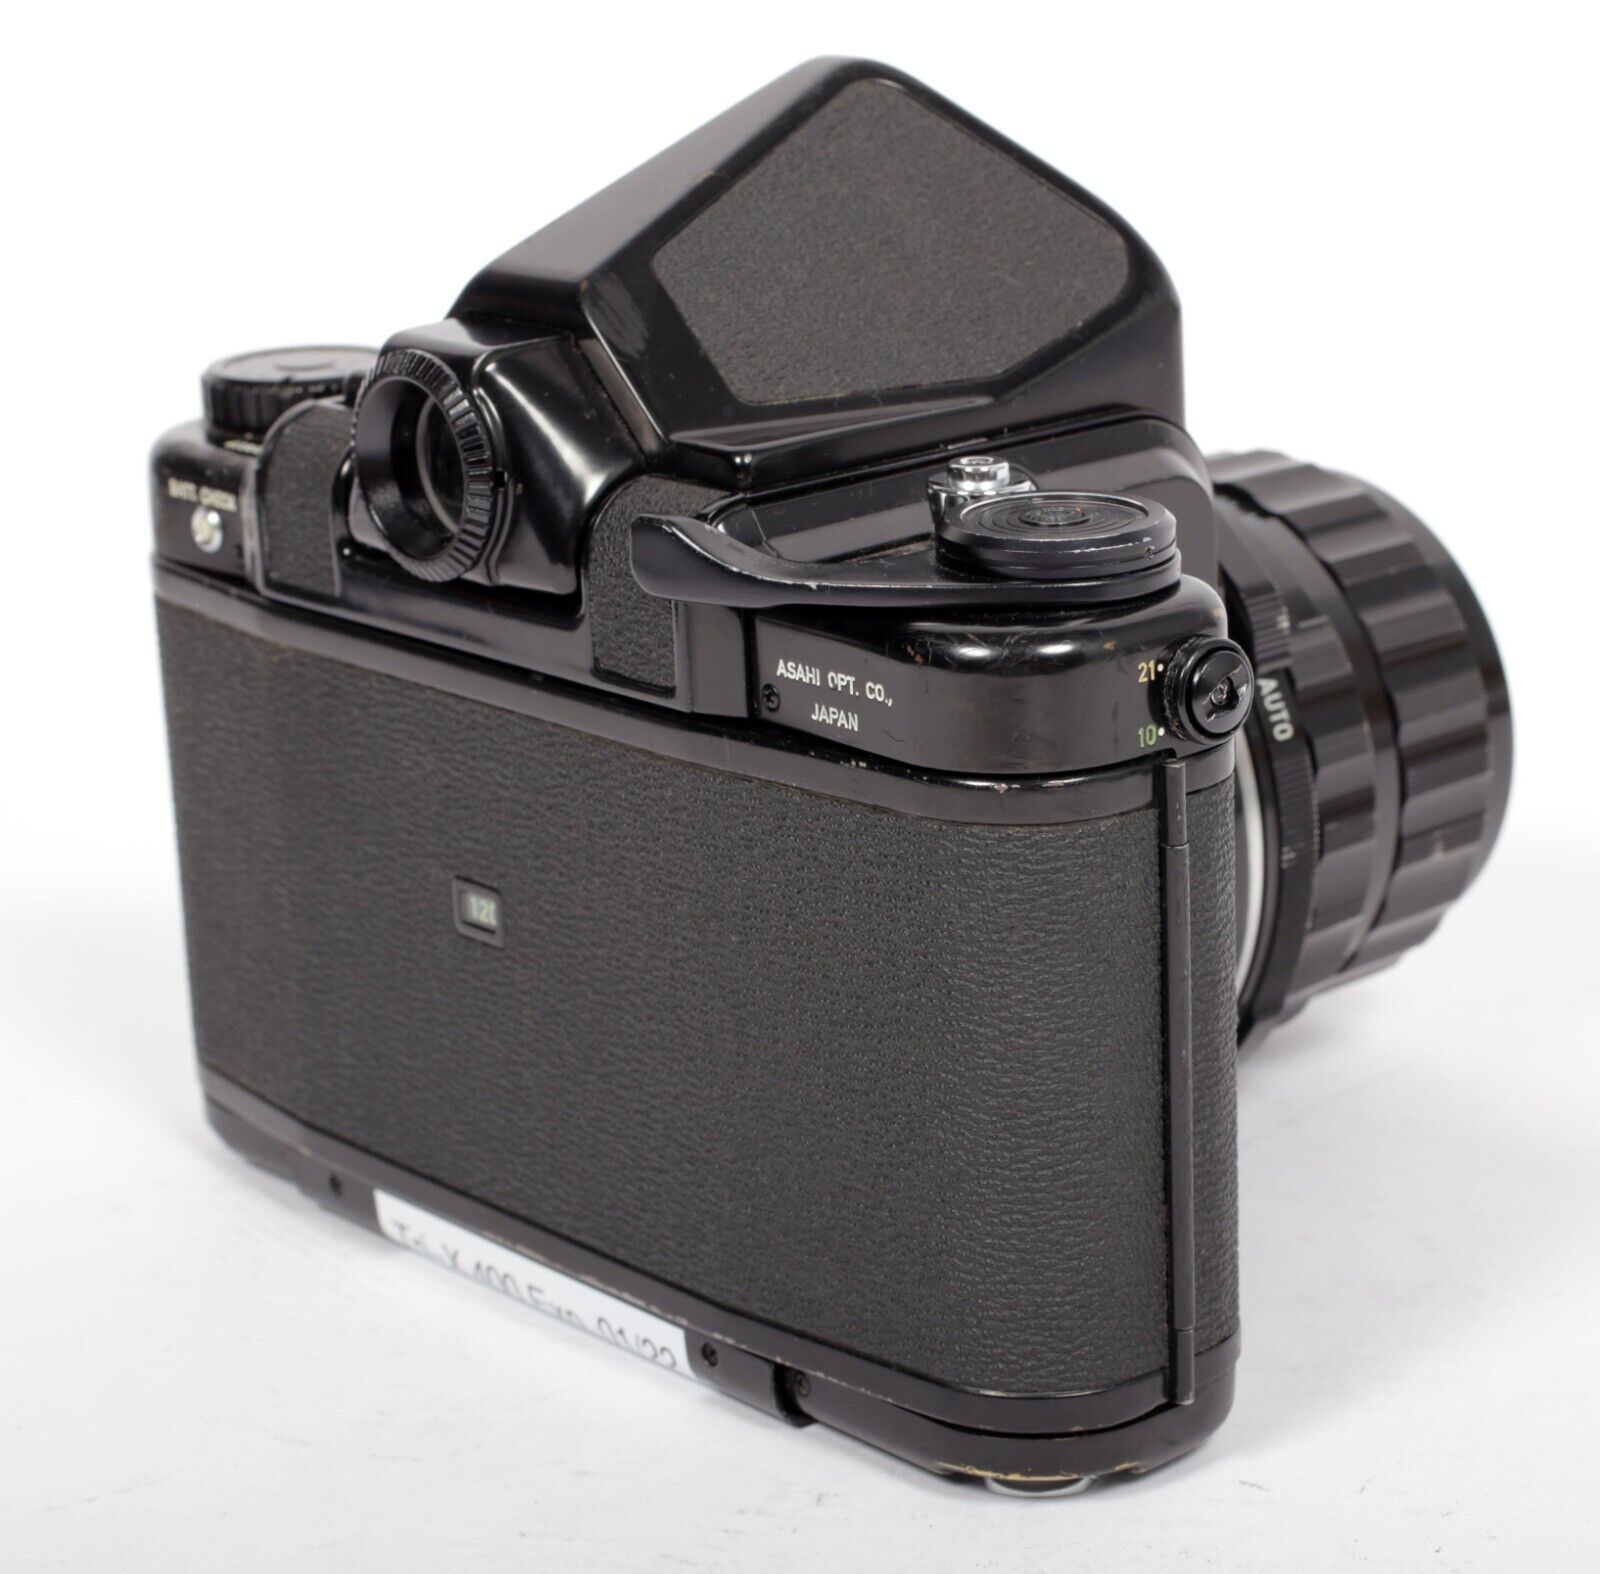 Pentax 6X7 camera with SMC 105mm F2.4 lens #8900 | CatLABS